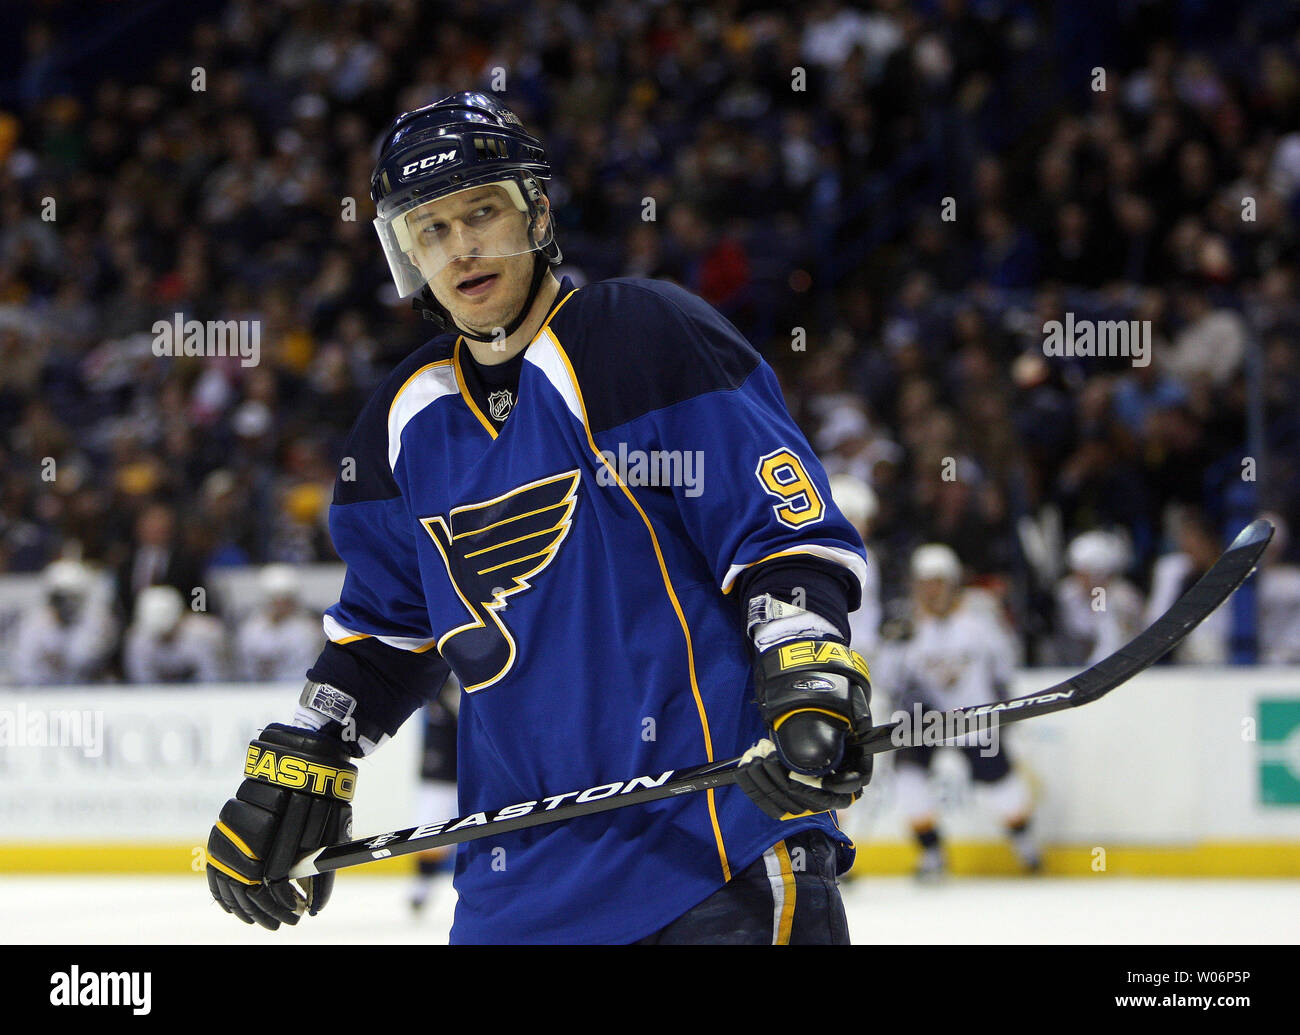 Paul Kariya's days with the Blues were brief, but the recent Hall of Fame  inductee remembers them fondly - The Athletic